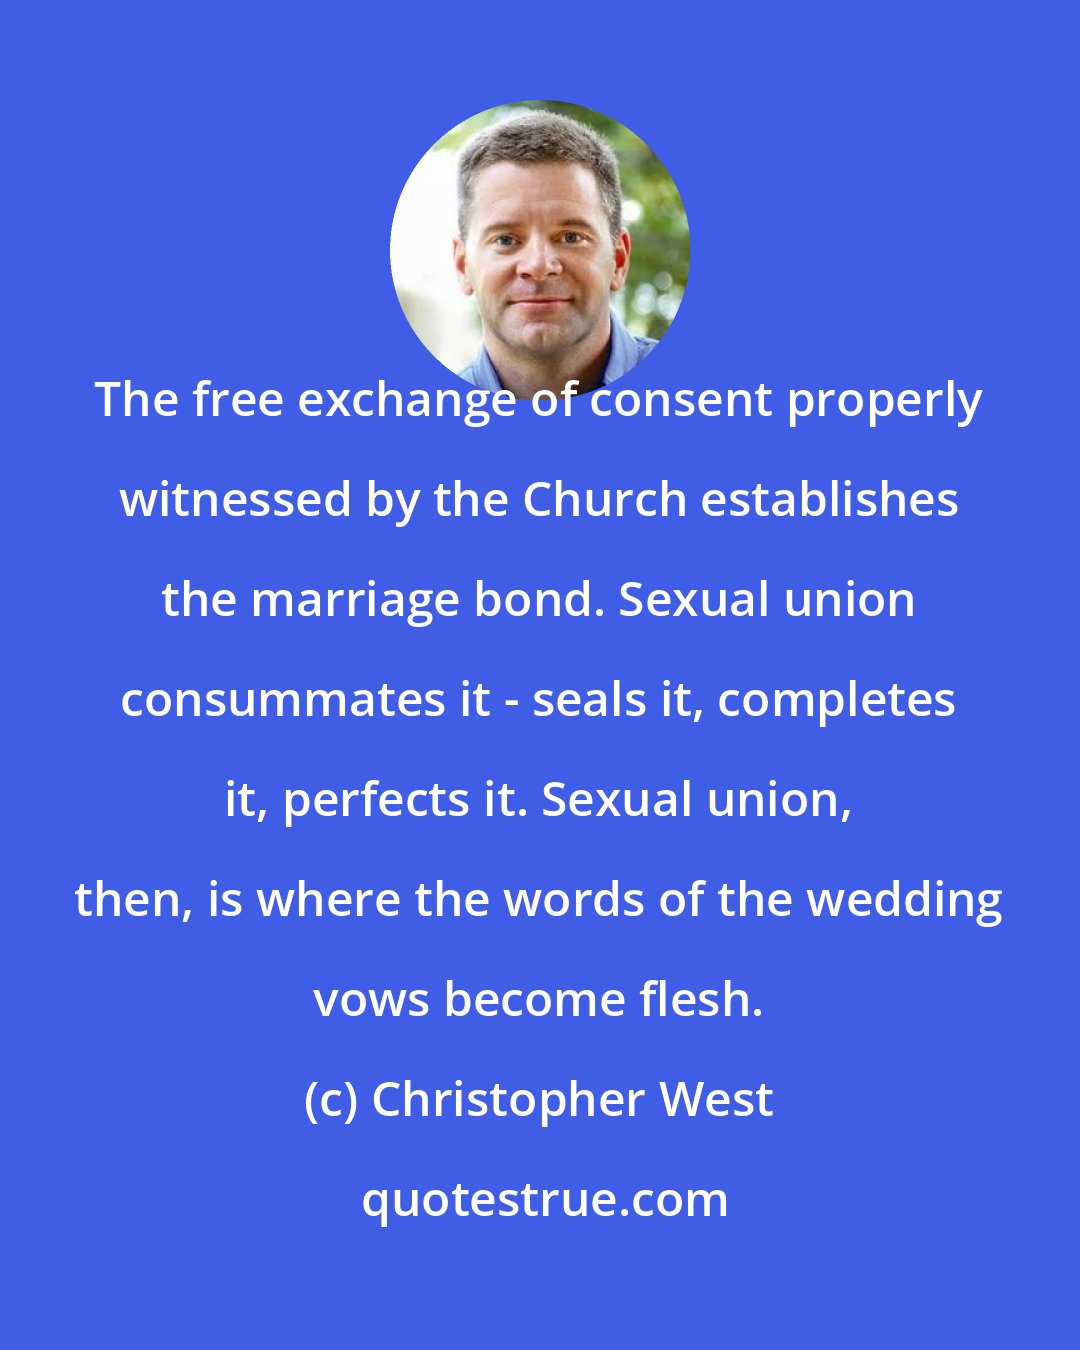 Christopher West: The free exchange of consent properly witnessed by the Church establishes the marriage bond. Sexual union consummates it - seals it, completes it, perfects it. Sexual union, then, is where the words of the wedding vows become flesh.